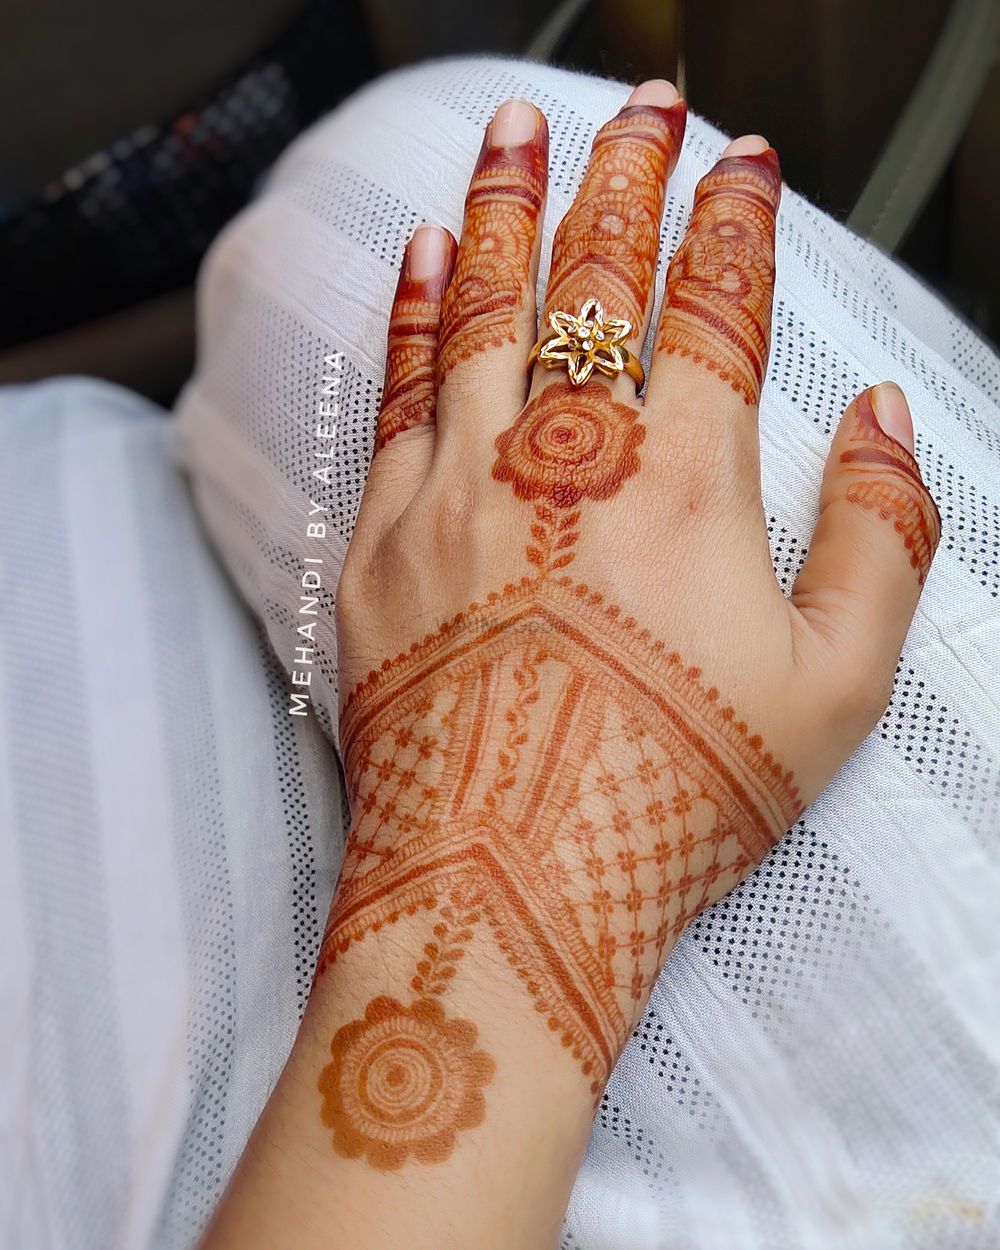 Photo From Indian and Arabic Party henna Album -2 - By Mehandi by Aleena